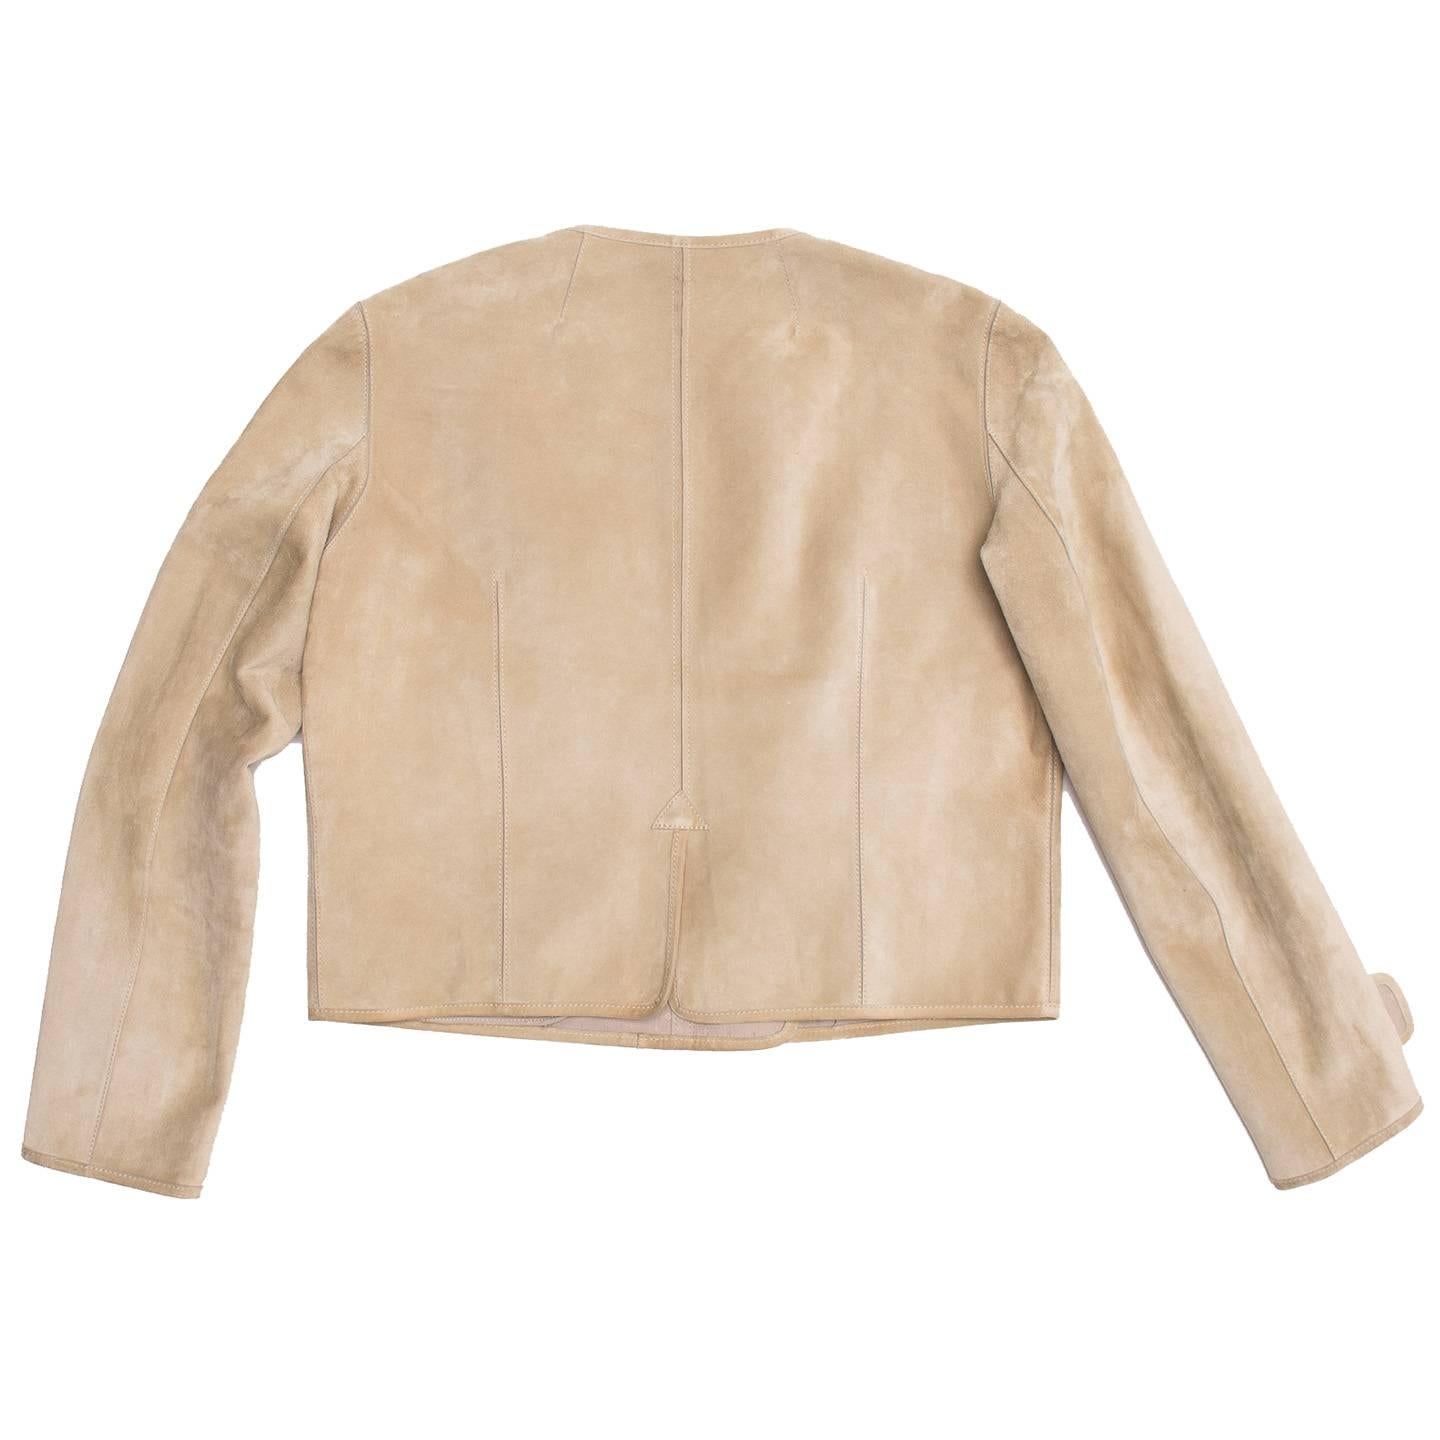 Louis Vuitton Tan Suede Cropped Jacket In Excellent Condition For Sale In Brooklyn, NY